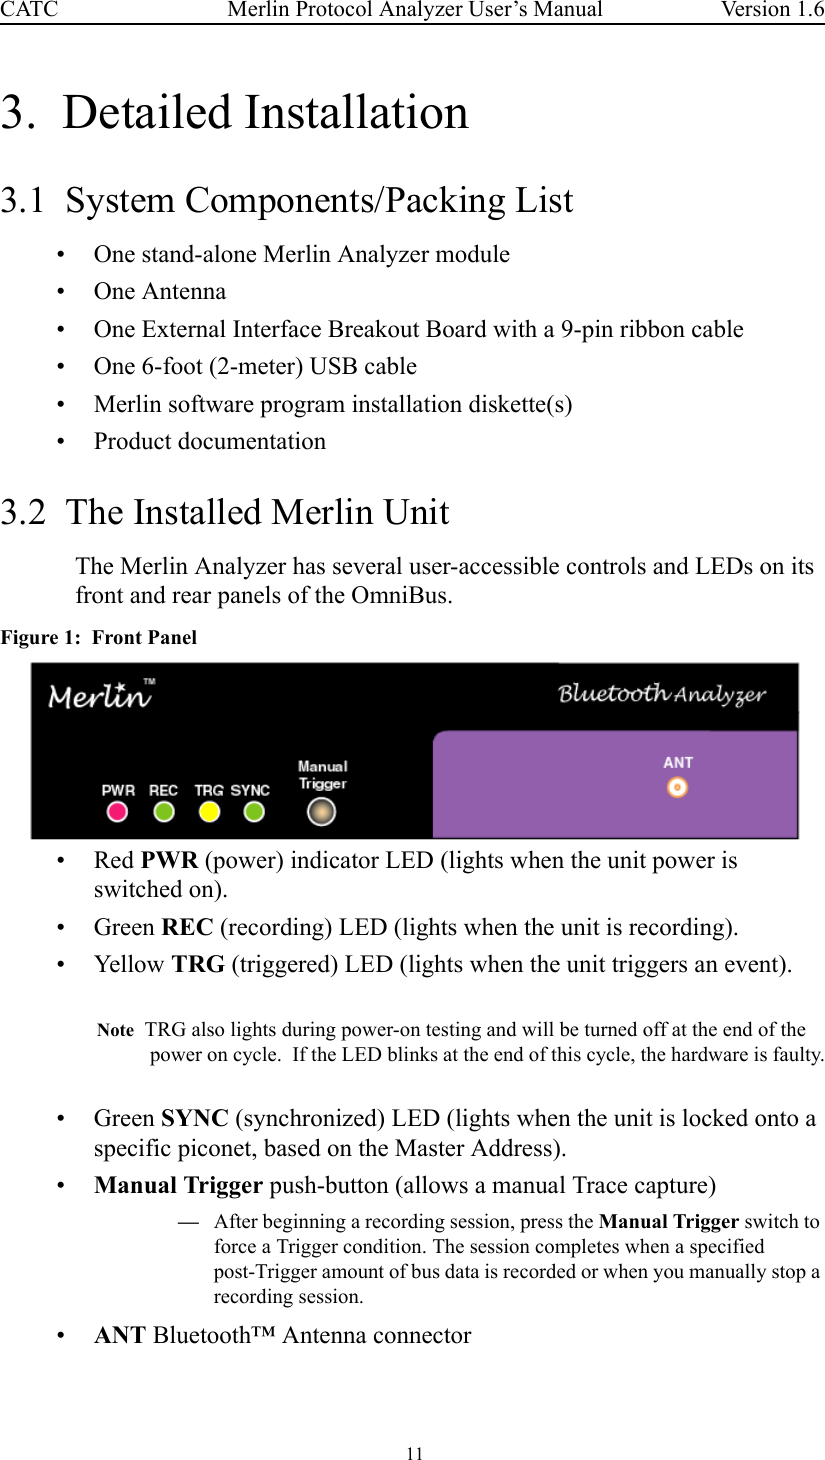  11 Merlin Protocol Analyzer User’s ManualCATC Version 1.63.  Detailed Installation3.1  System Components/Packing List• One stand-alone Merlin Analyzer module• One Antenna• One External Interface Breakout Board with a 9-pin ribbon cable• One 6-foot (2-meter) USB cable• Merlin software program installation diskette(s)• Product documentation3.2  The Installed Merlin UnitThe Merlin Analyzer has several user-accessible controls and LEDs on its front and rear panels of the OmniBus.Figure 1:  Front Panel •Red PWR (power) indicator LED (lights when the unit power is switched on).•Green REC (recording) LED (lights when the unit is recording).• Yellow TRG (triggered) LED (lights when the unit triggers an event).Note  TRG also lights during power-on testing and will be turned off at the end of the power on cycle.  If the LED blinks at the end of this cycle, the hardware is faulty.•Green SYNC (synchronized) LED (lights when the unit is locked onto a specific piconet, based on the Master Address).•Manual Trigger push-button (allows a manual Trace capture)—After beginning a recording session, press the Manual Trigger switch to force a Trigger condition. The session completes when a specified post-Trigger amount of bus data is recorded or when you manually stop a recording session. •ANT Bluetooth™ Antenna connector